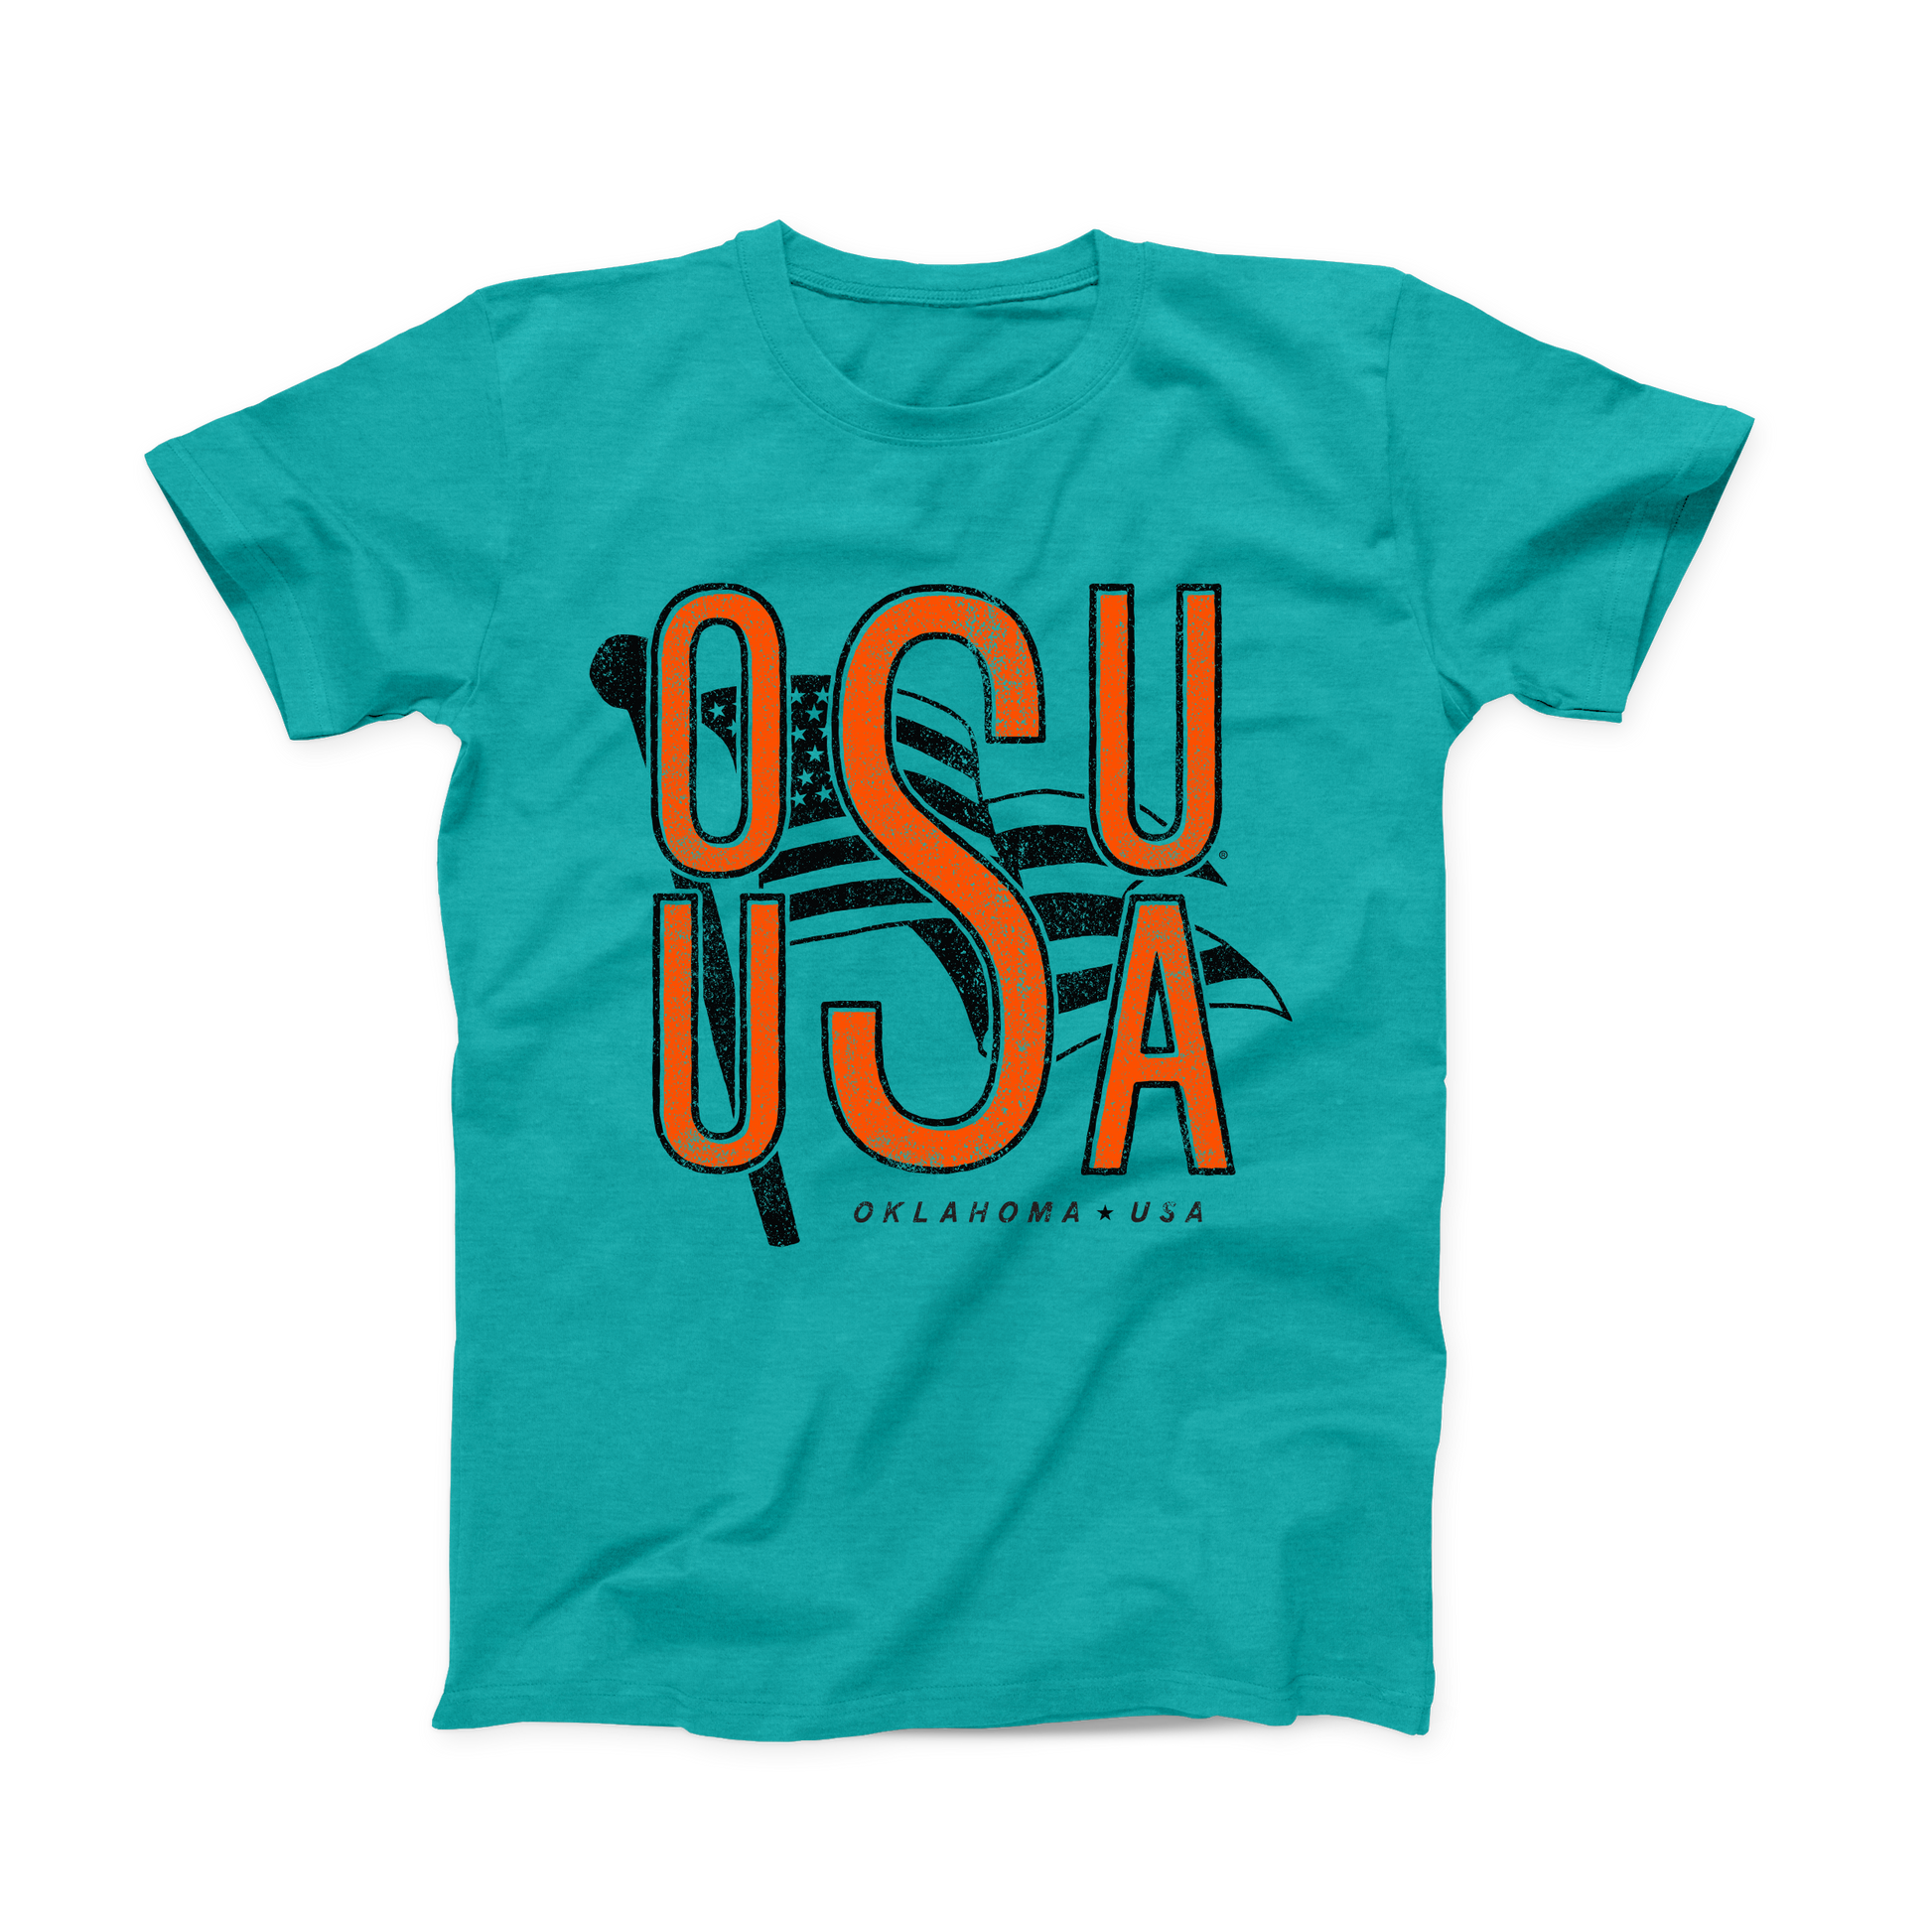 Teal OSU T-shirt. Orange font OSU stacked atop USA, sharing the S. Black American Flag in the background, and small "Oklahoma (star) USA" at the bottom.